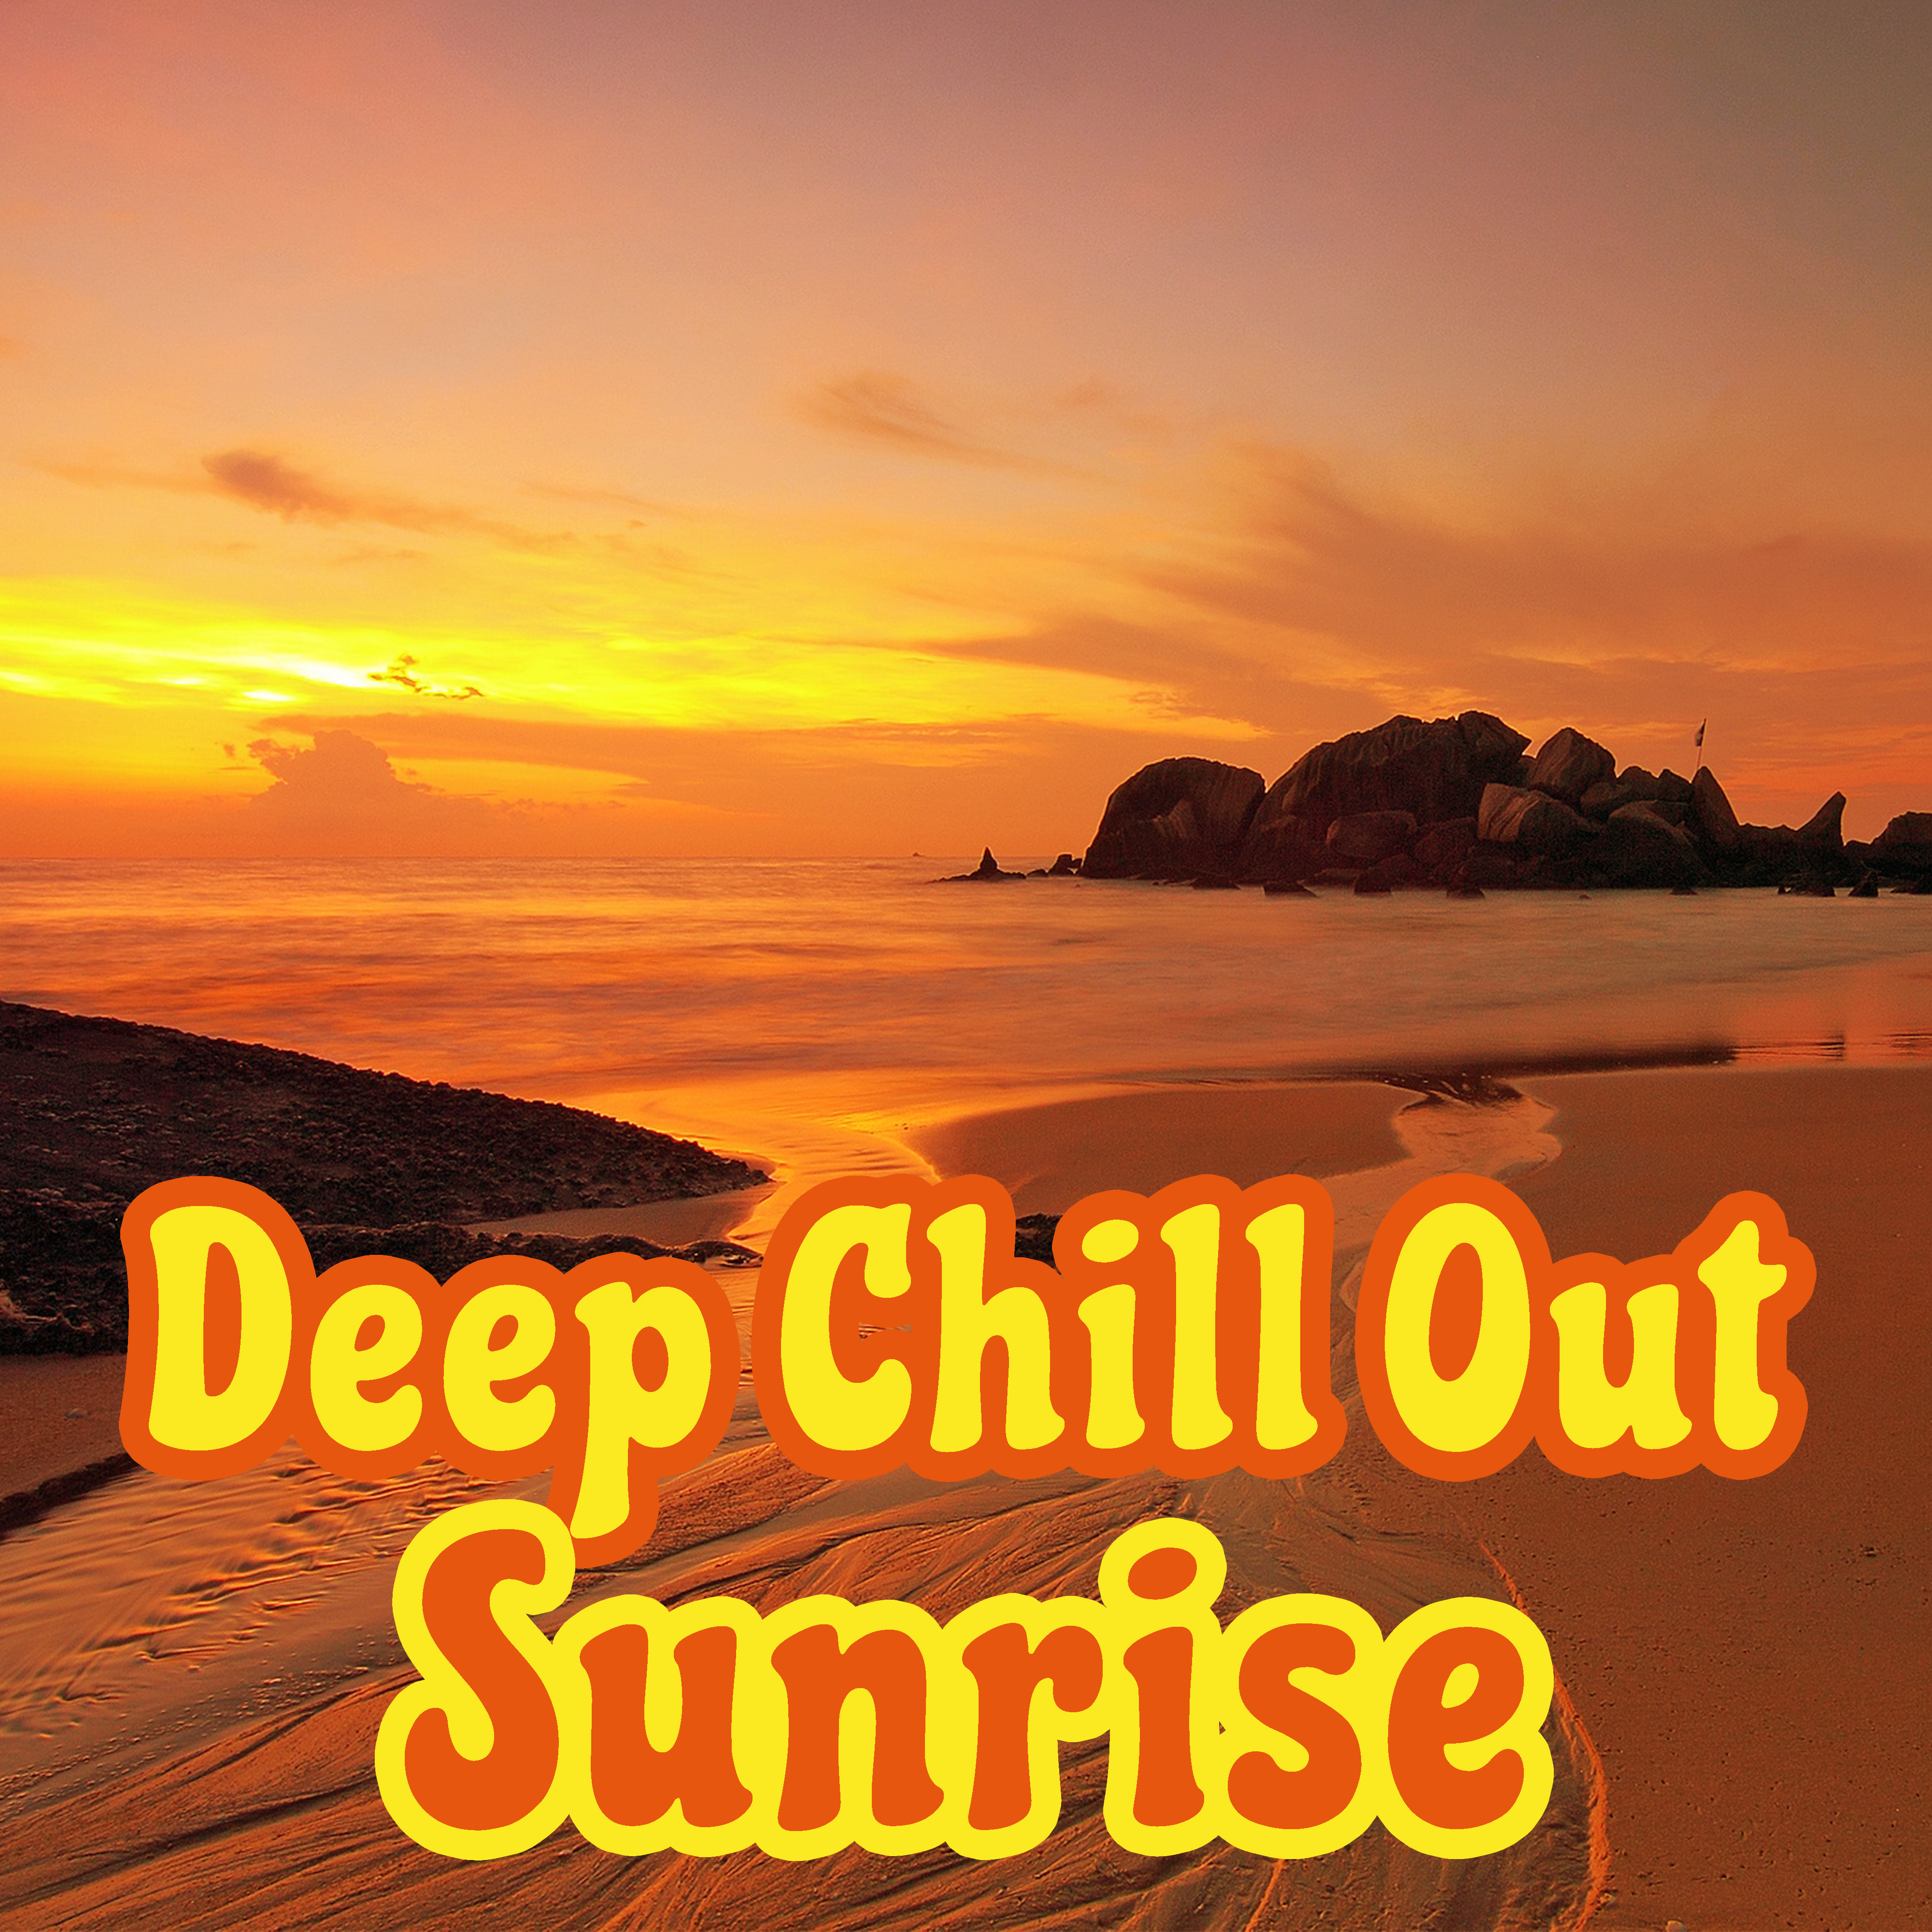 Deep Chill Out Sunrise  Sunbed Chill, Deep Relaxation, Chill Out Memories, Summer 2017